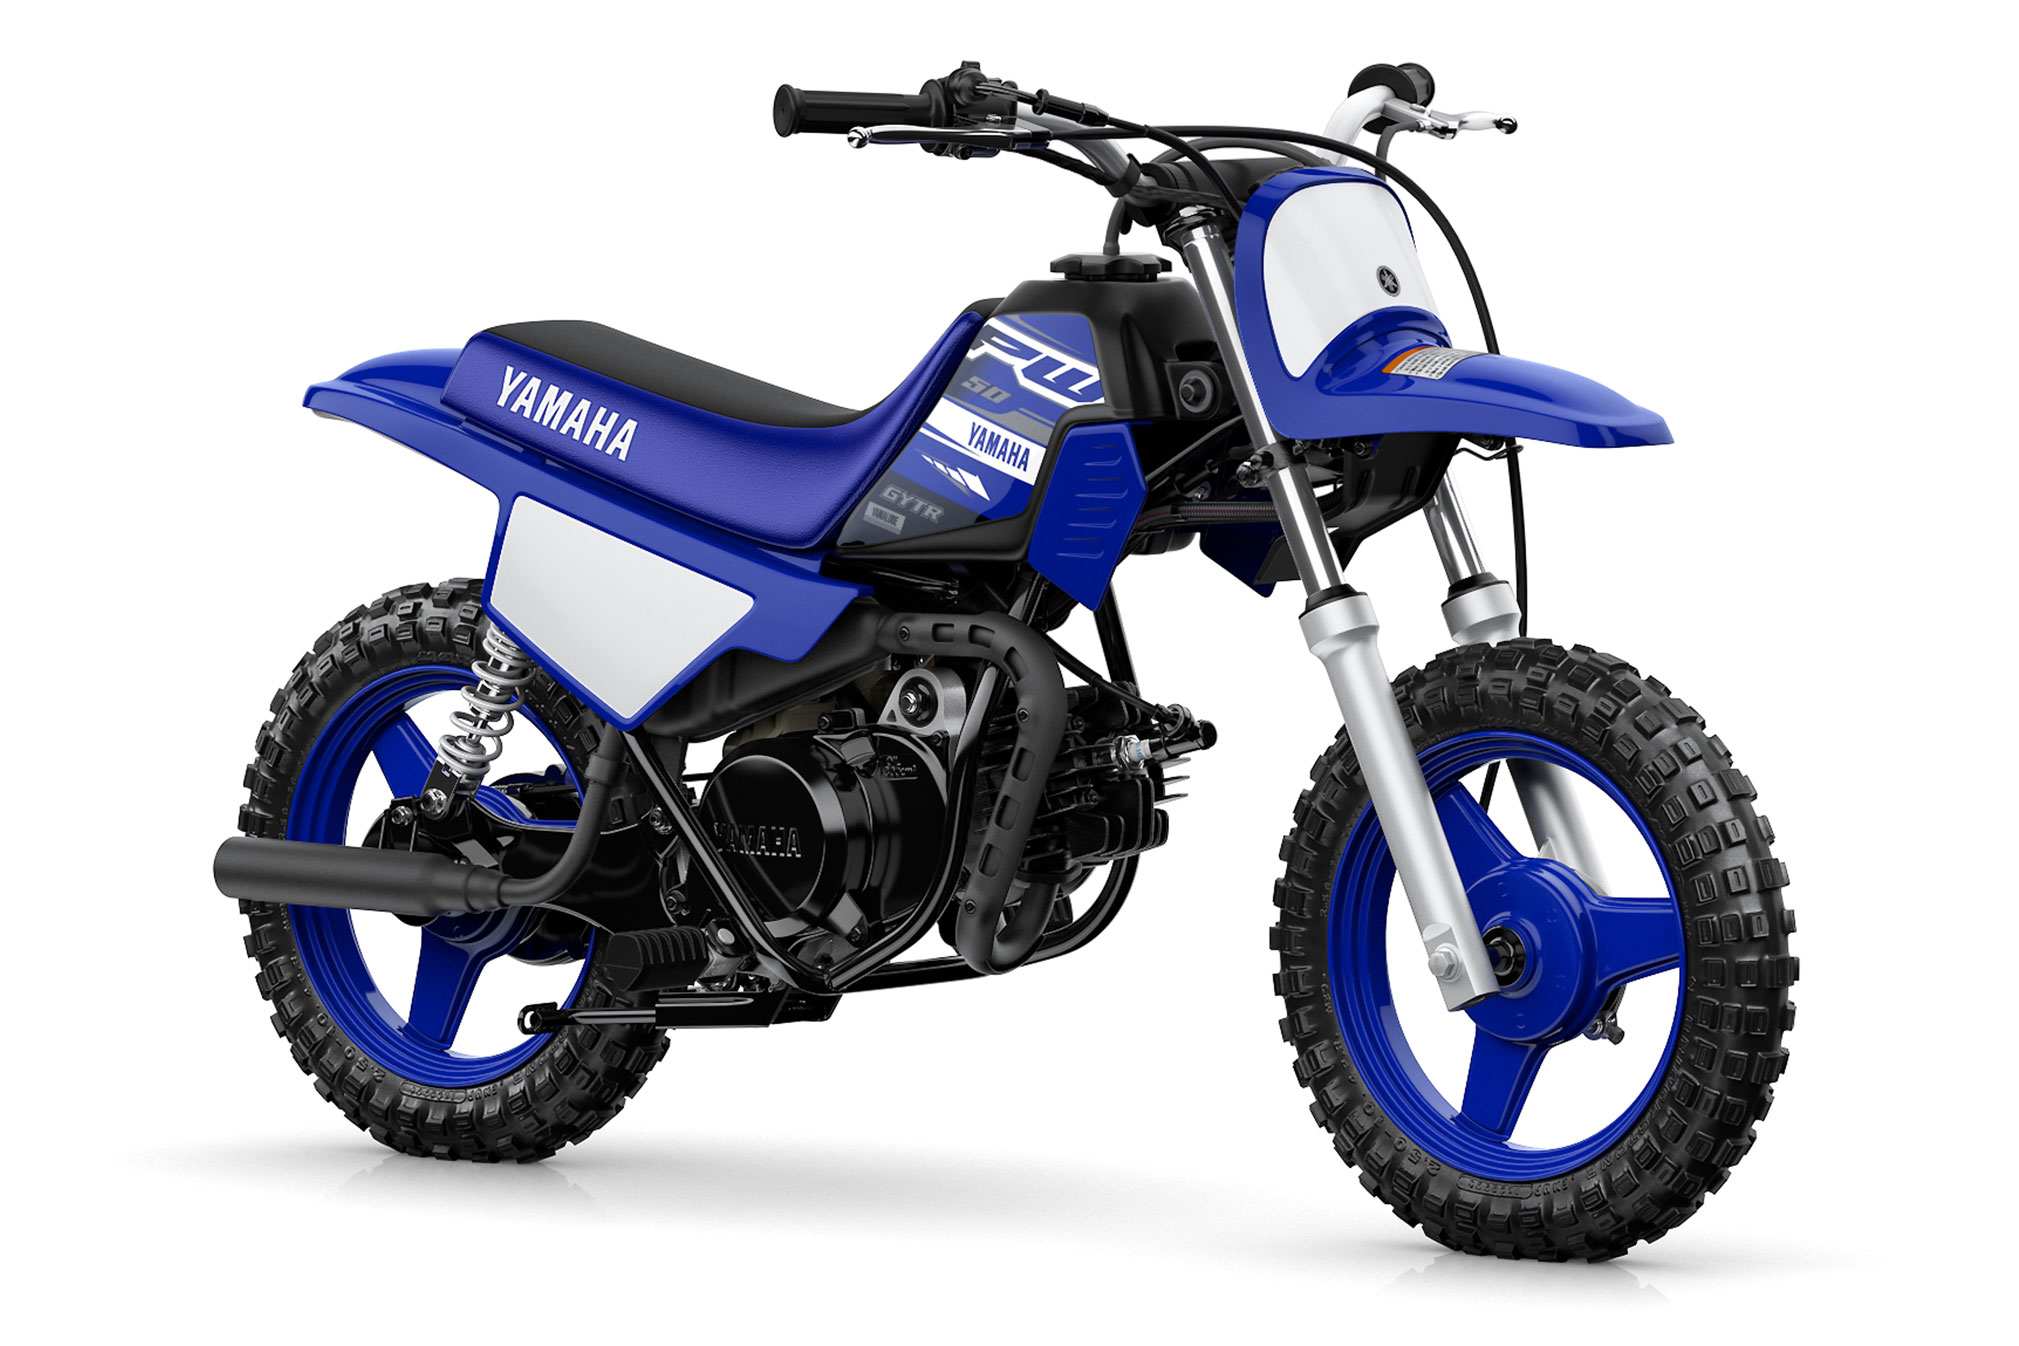 2019 Yamaha PW50 Guide • Total Motorcycle